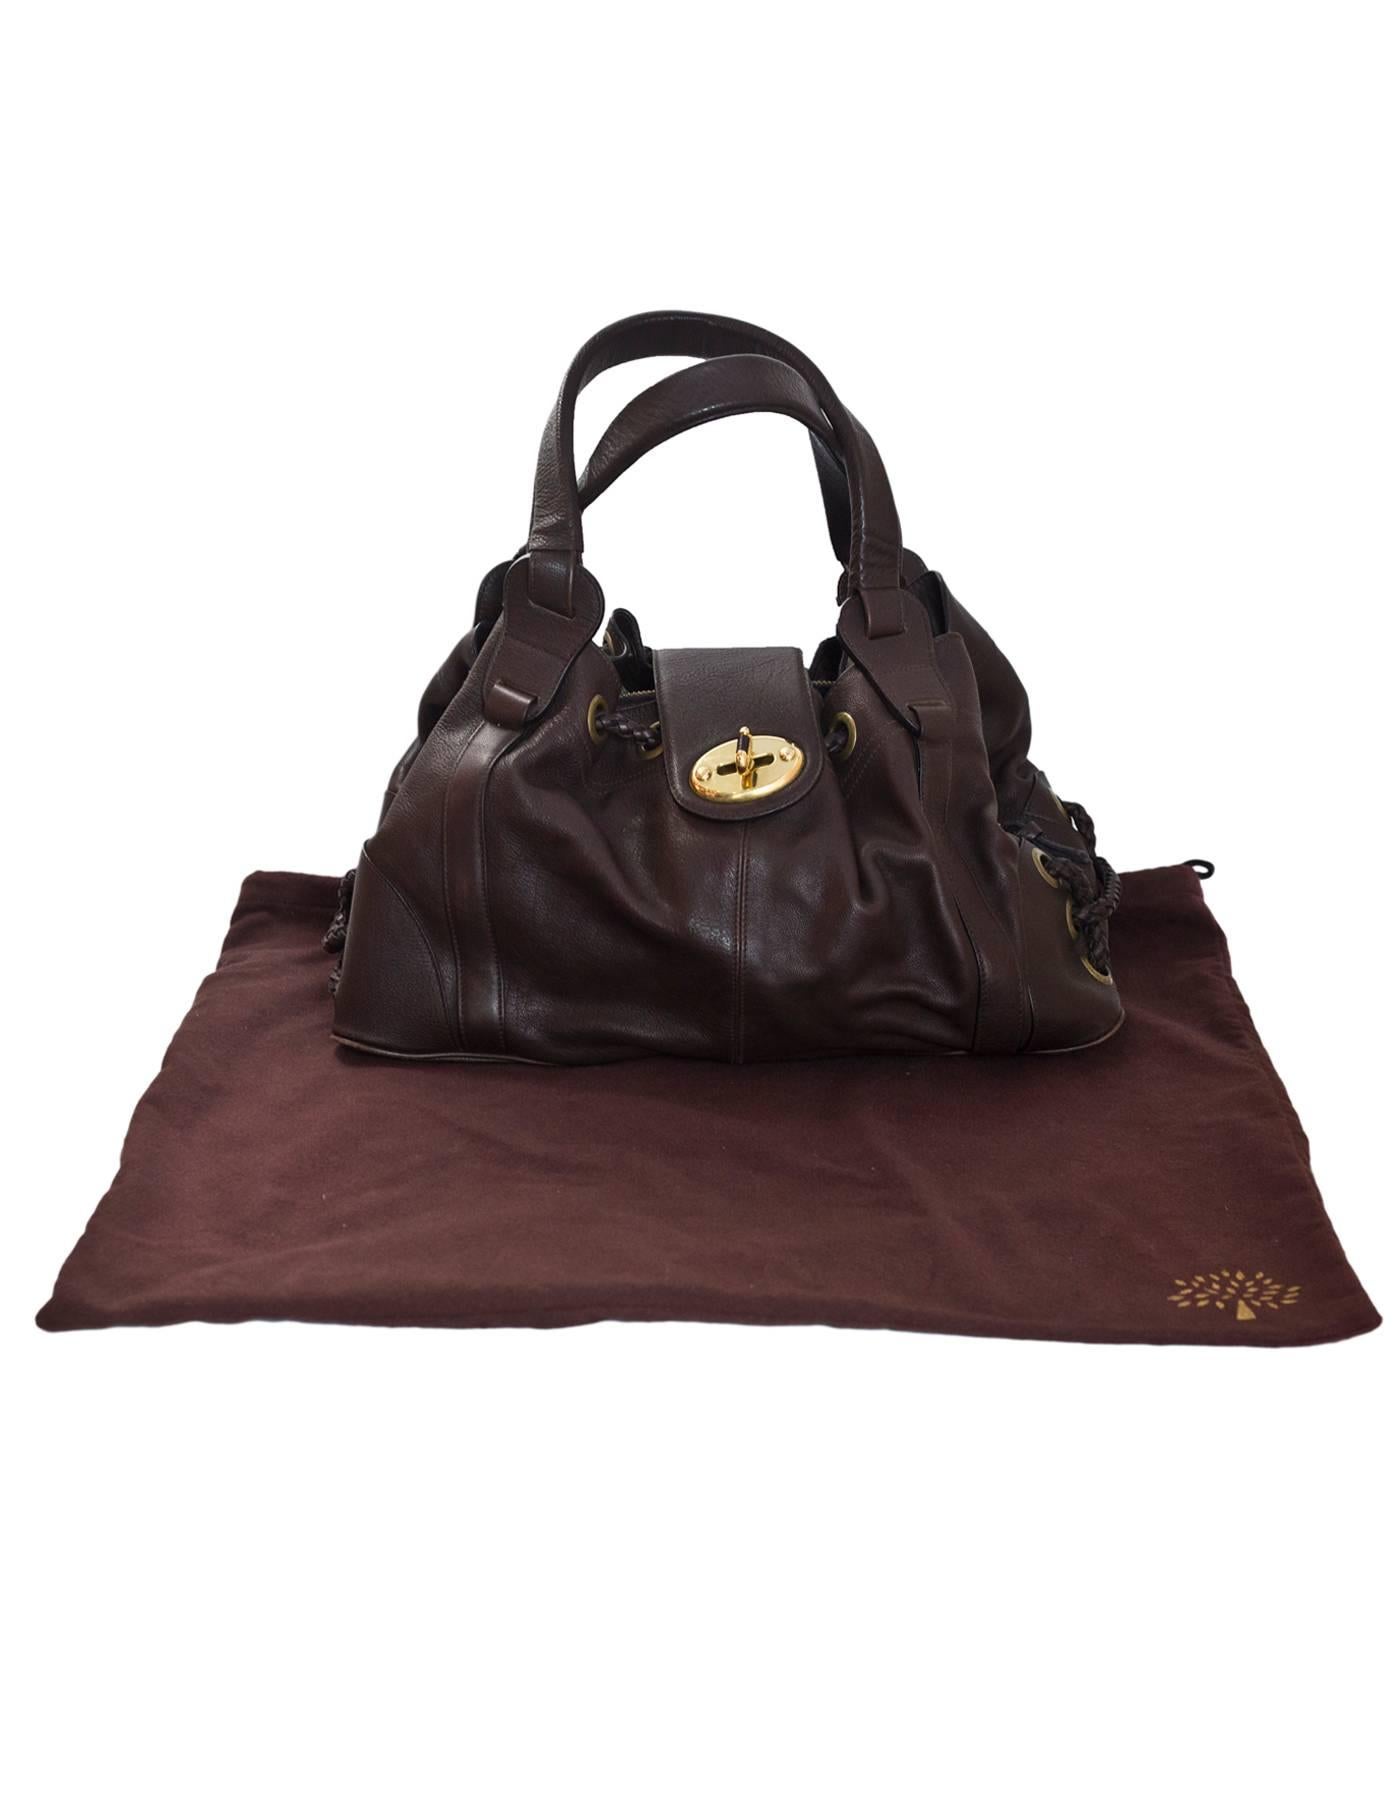 Mulberry Brown Leather Tote Bag with Dust Bag 5